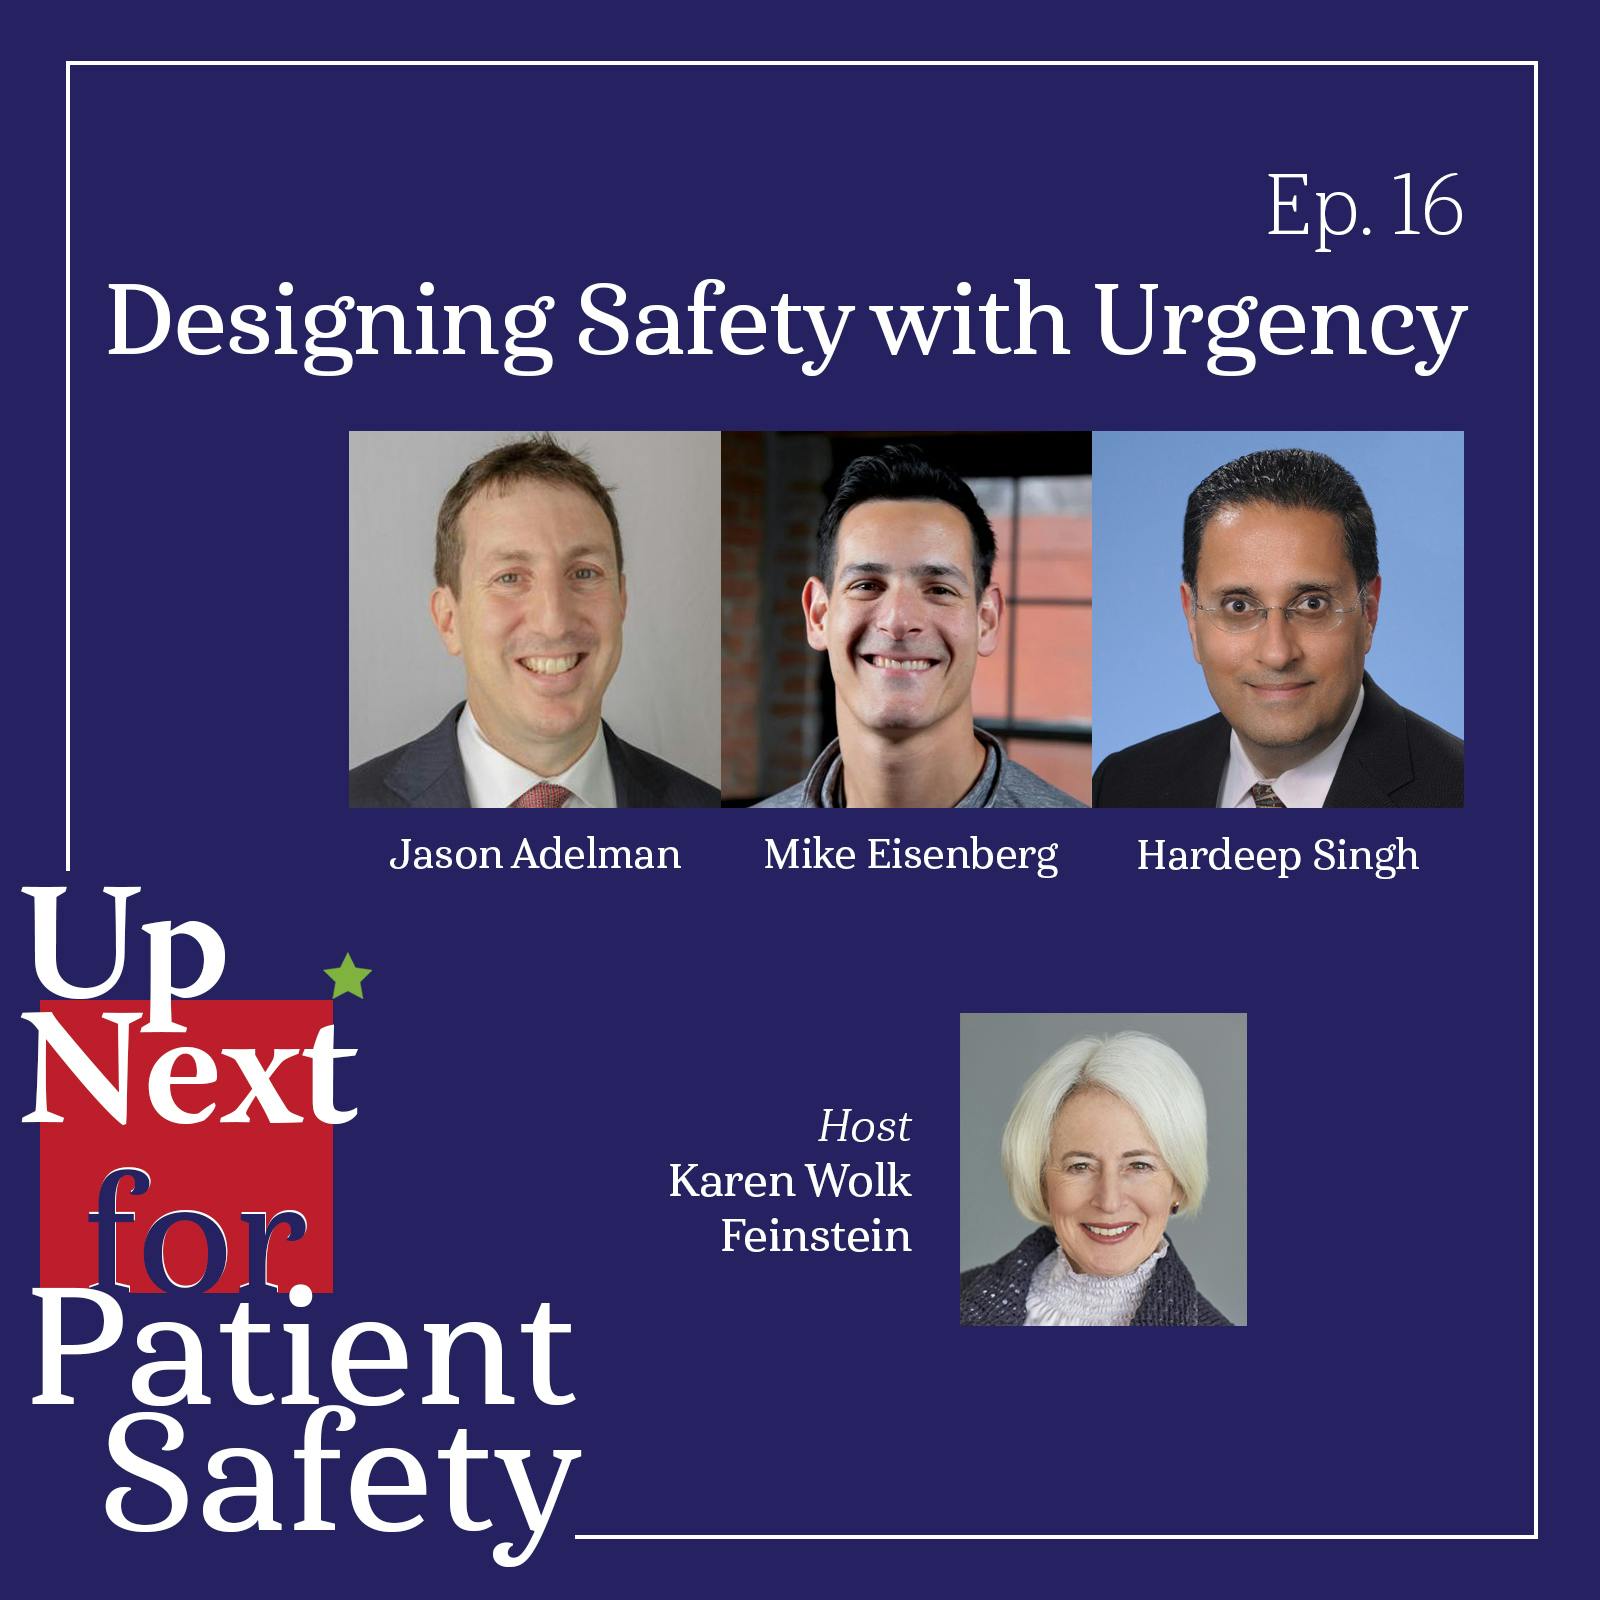 Up Next For Patient Safety: Designing Safety with Urgency